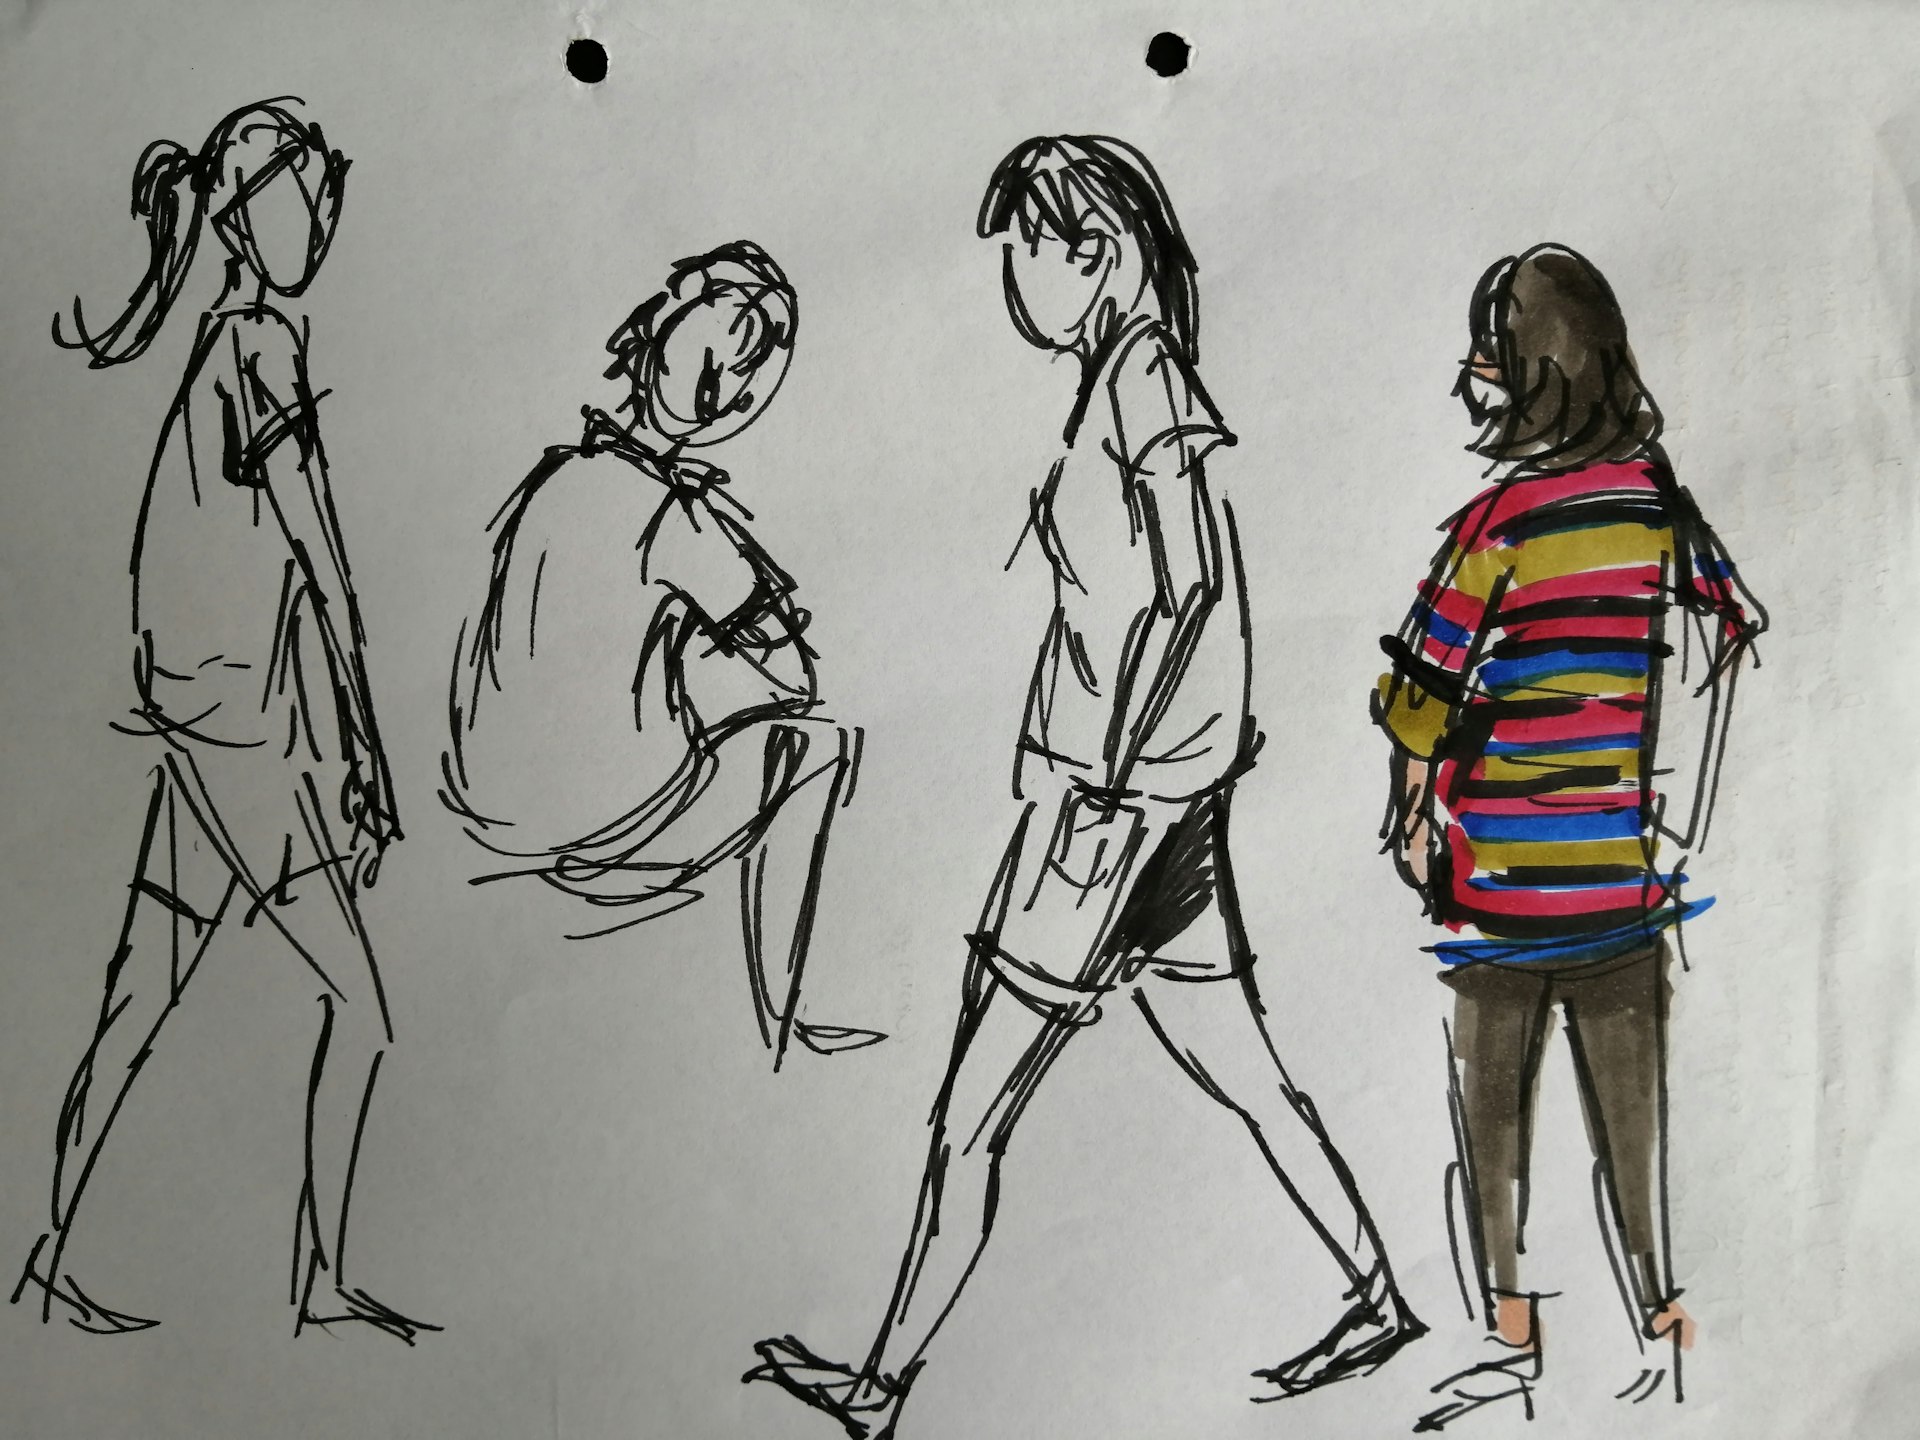 Fountain pen sketches of people walking through Our Tampines Hub